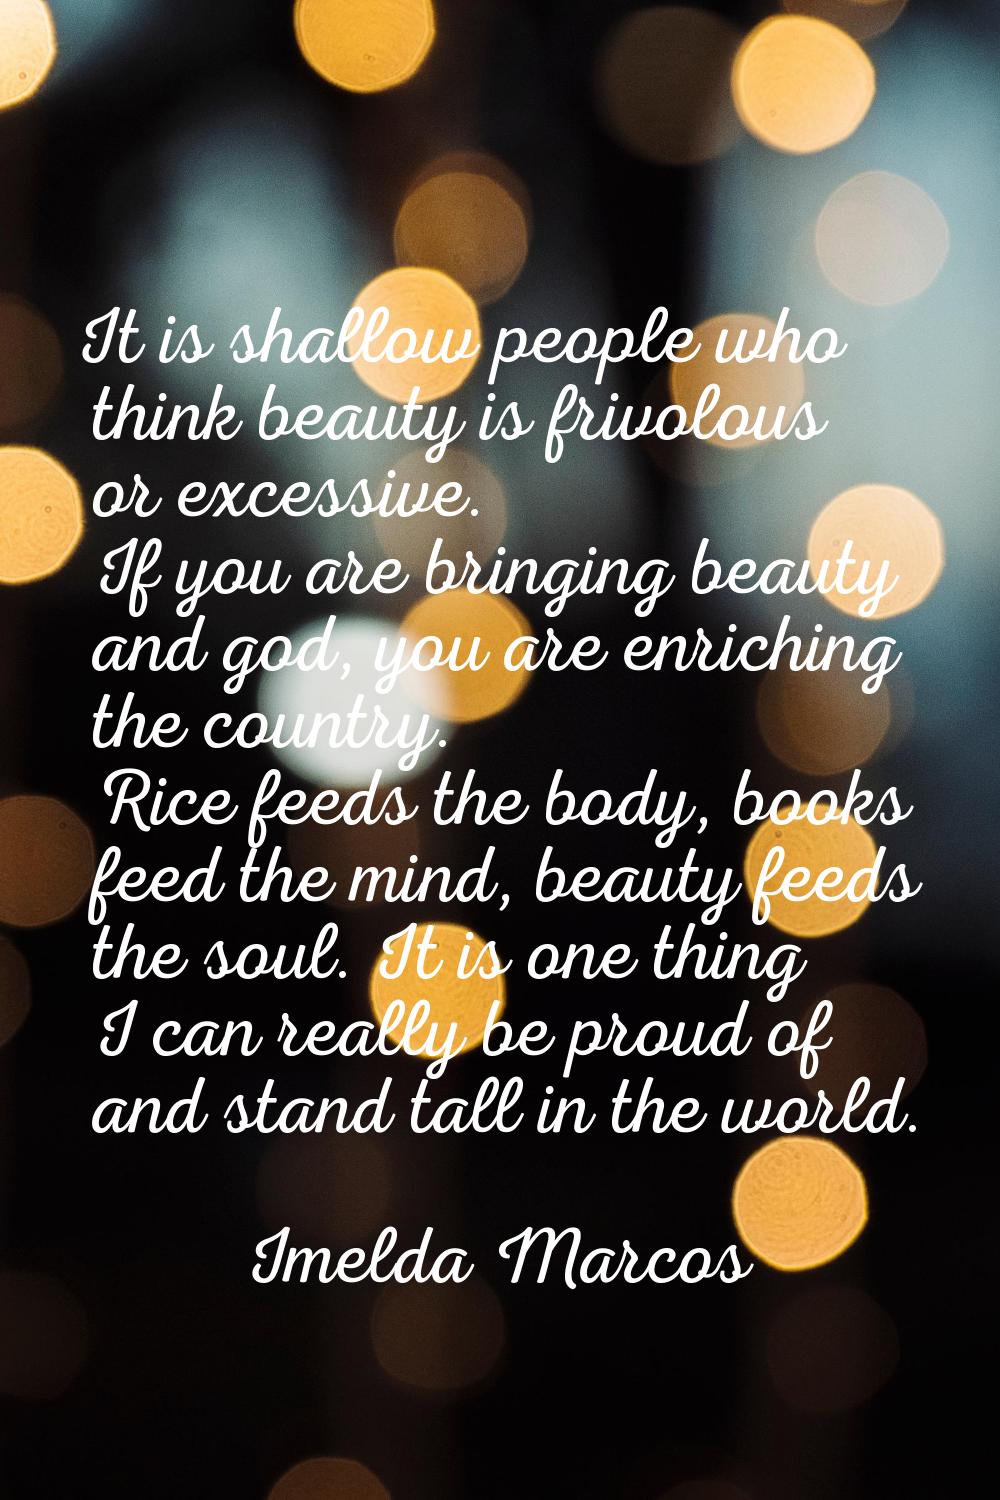 It is shallow people who think beauty is frivolous or excessive. If you are bringing beauty and god